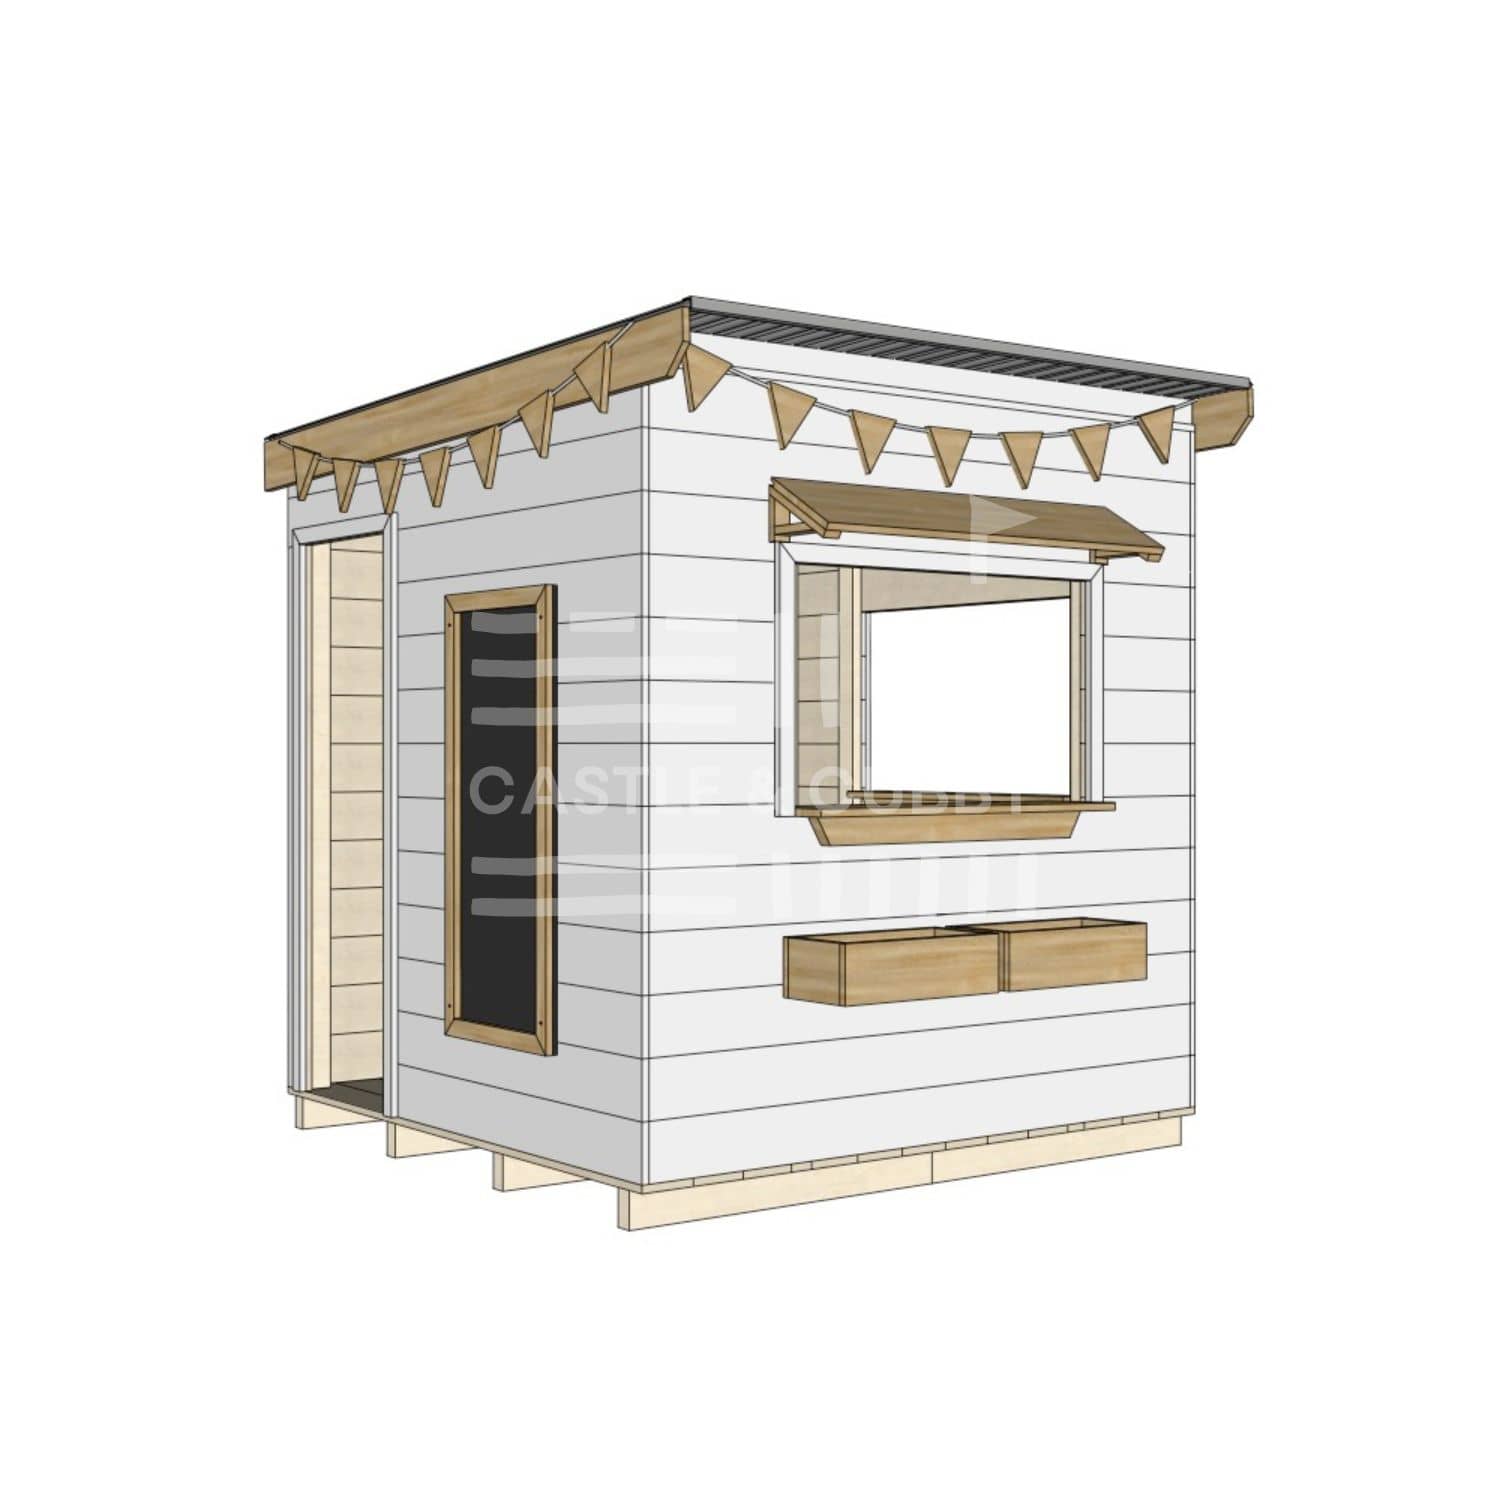 Flat roof painted extra height wooden cubby house commercial education midi square accessories